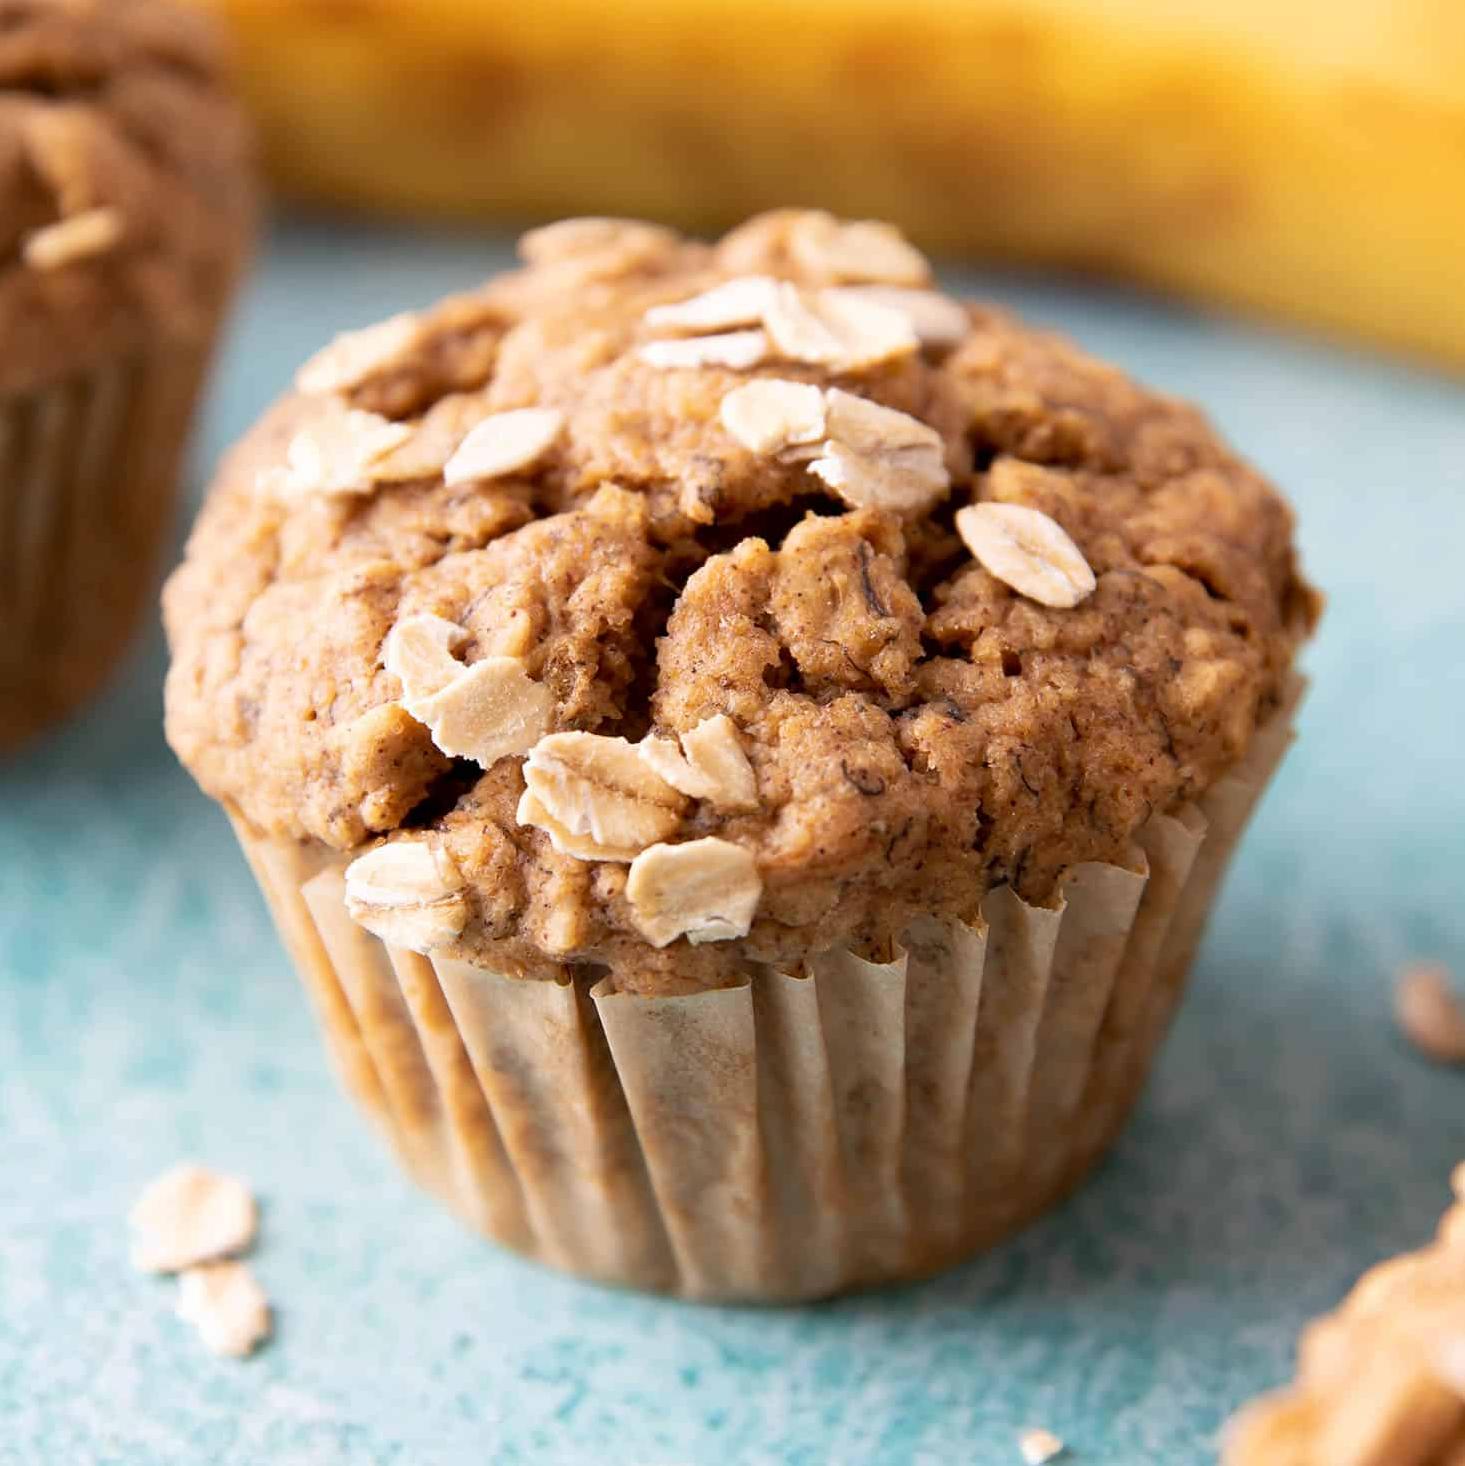  These muffins are a healthy twist on a classic breakfast food.